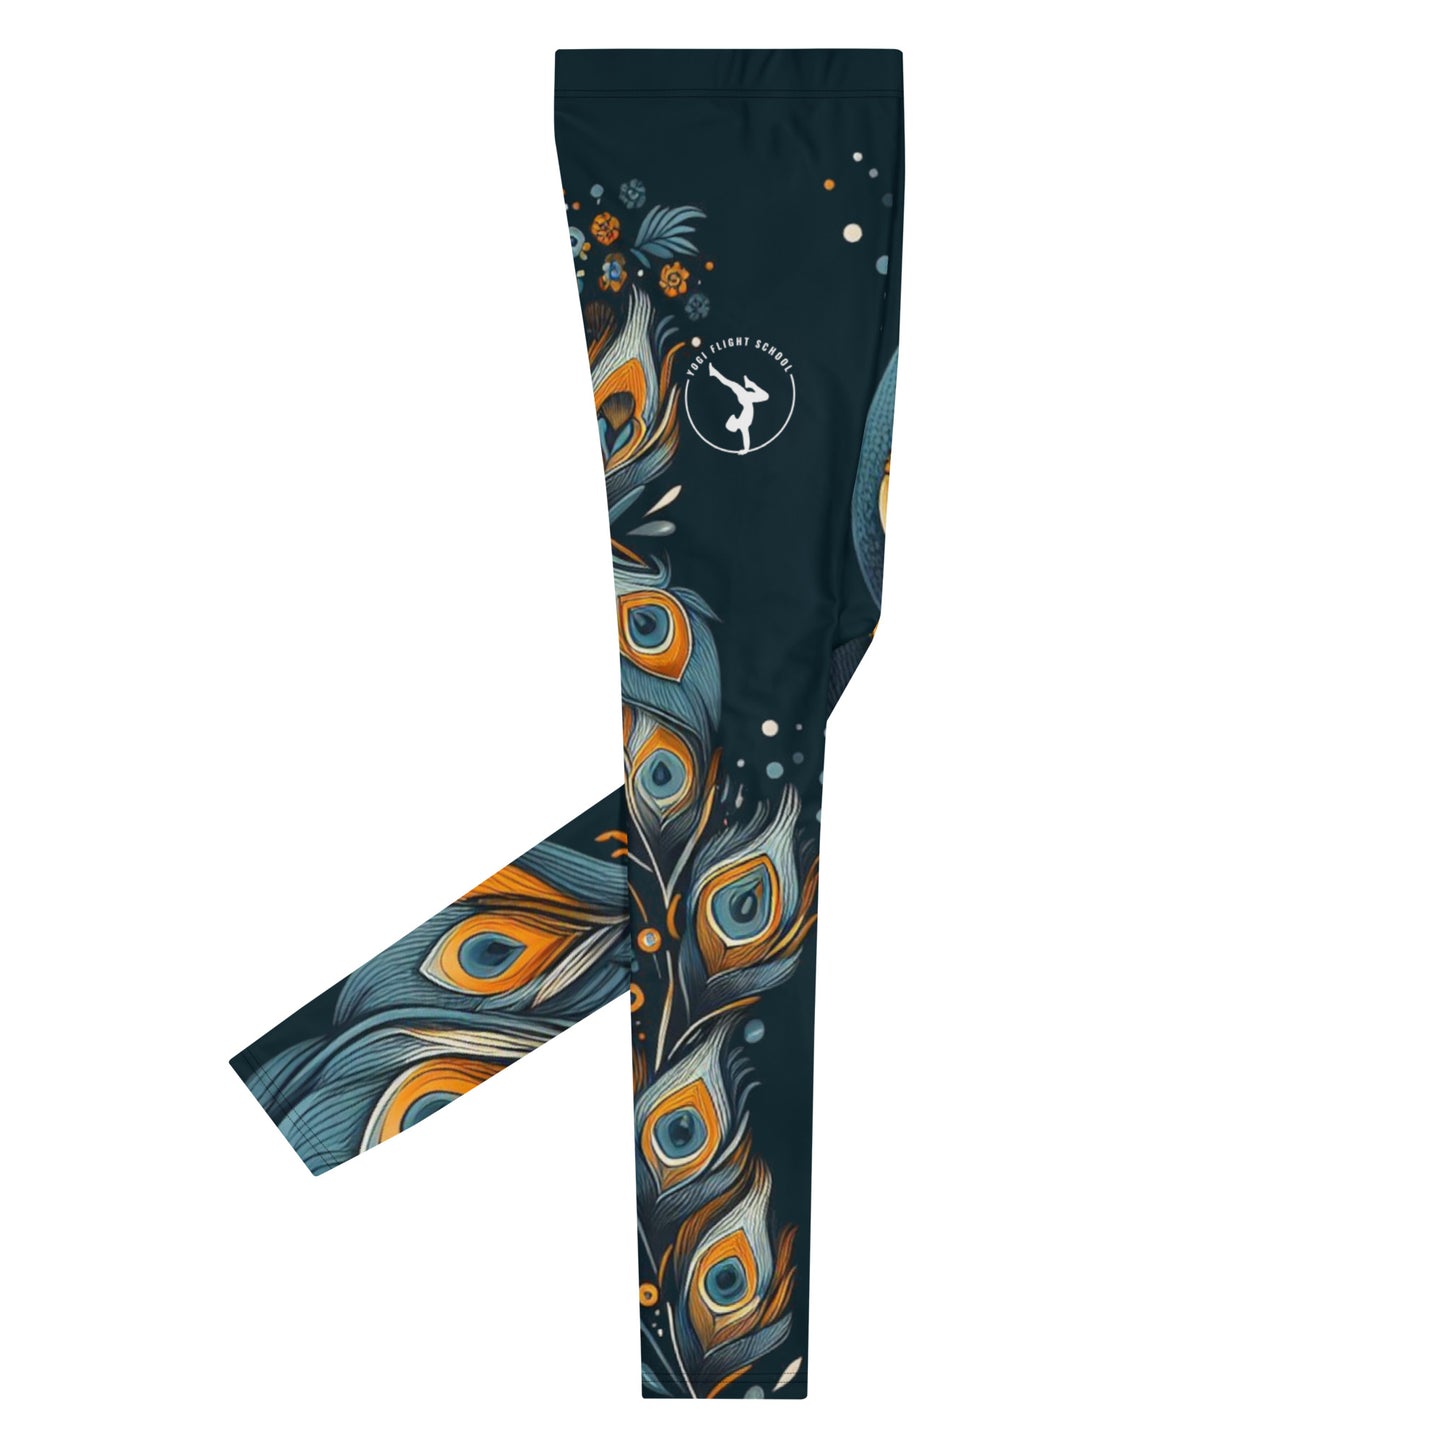 Cyber Peacock Leggings (mens) LIMITED EDITION